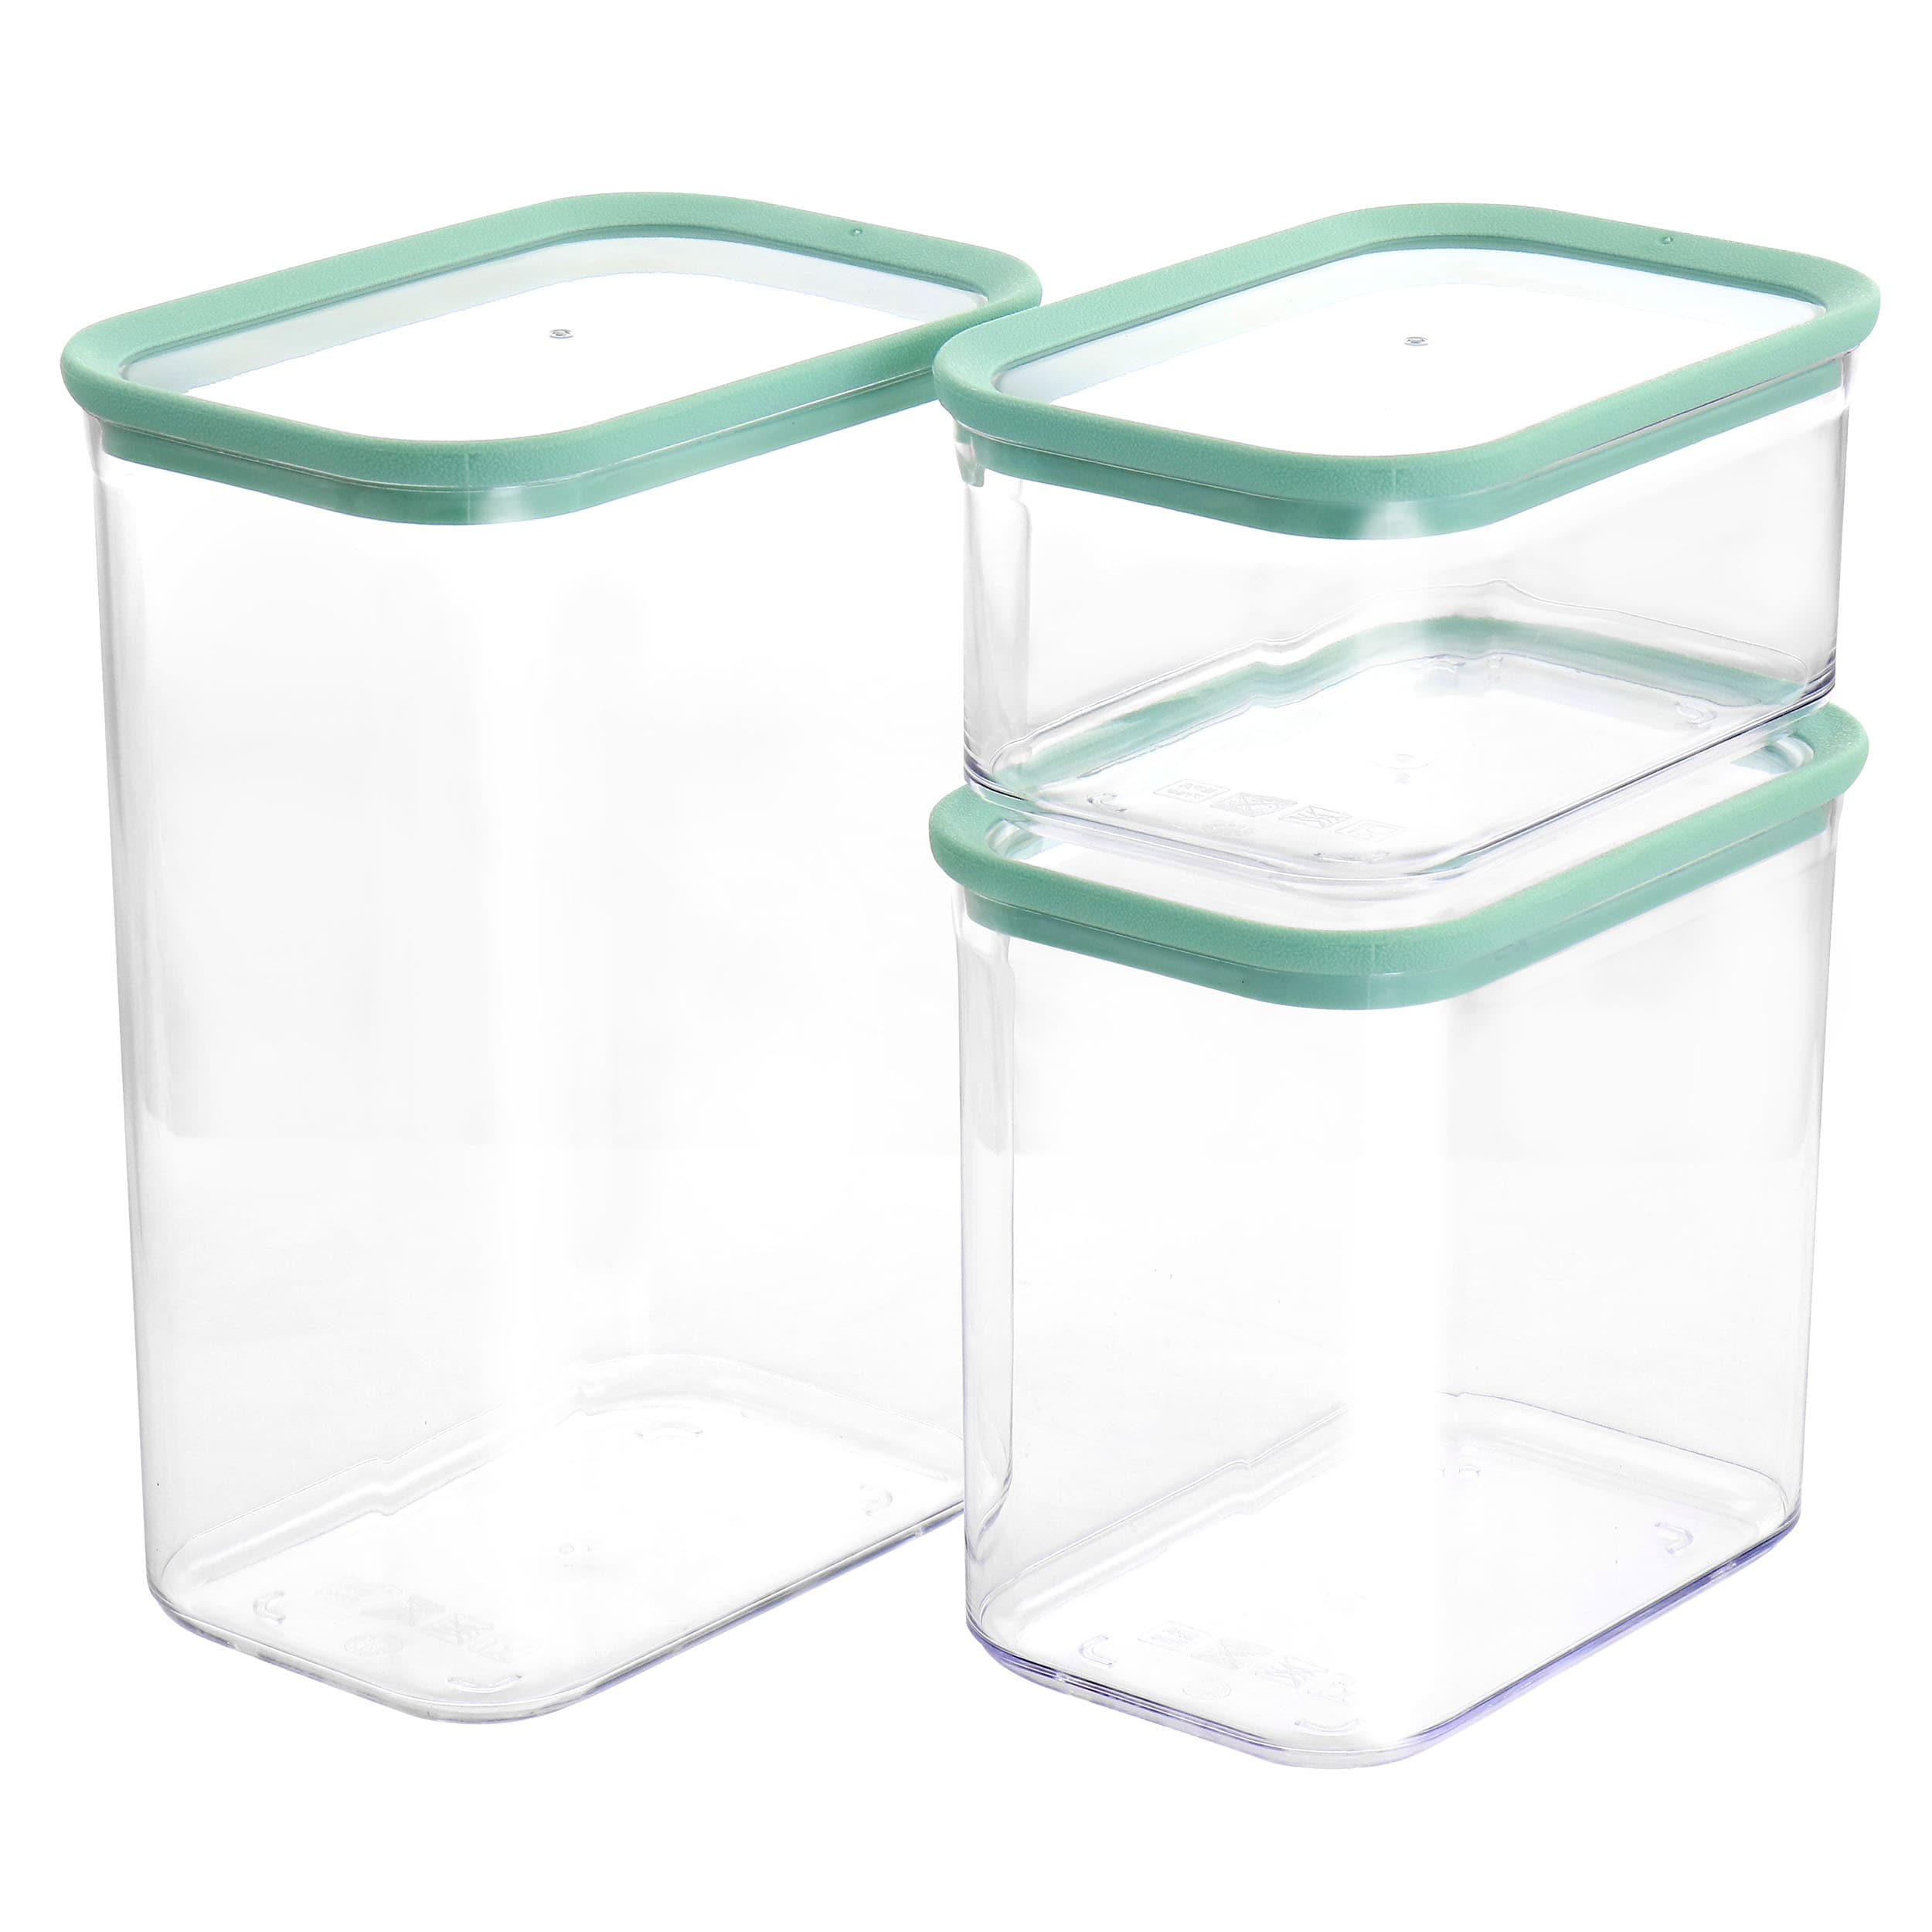 https://ak1.ostkcdn.com/images/products/is/images/direct/fe1802afd667b08b15183459d09fc41903289127/Martha-Stewart-3-Piece-Rectangular-Plastic-Container-Set-in-Mint-Green.jpg